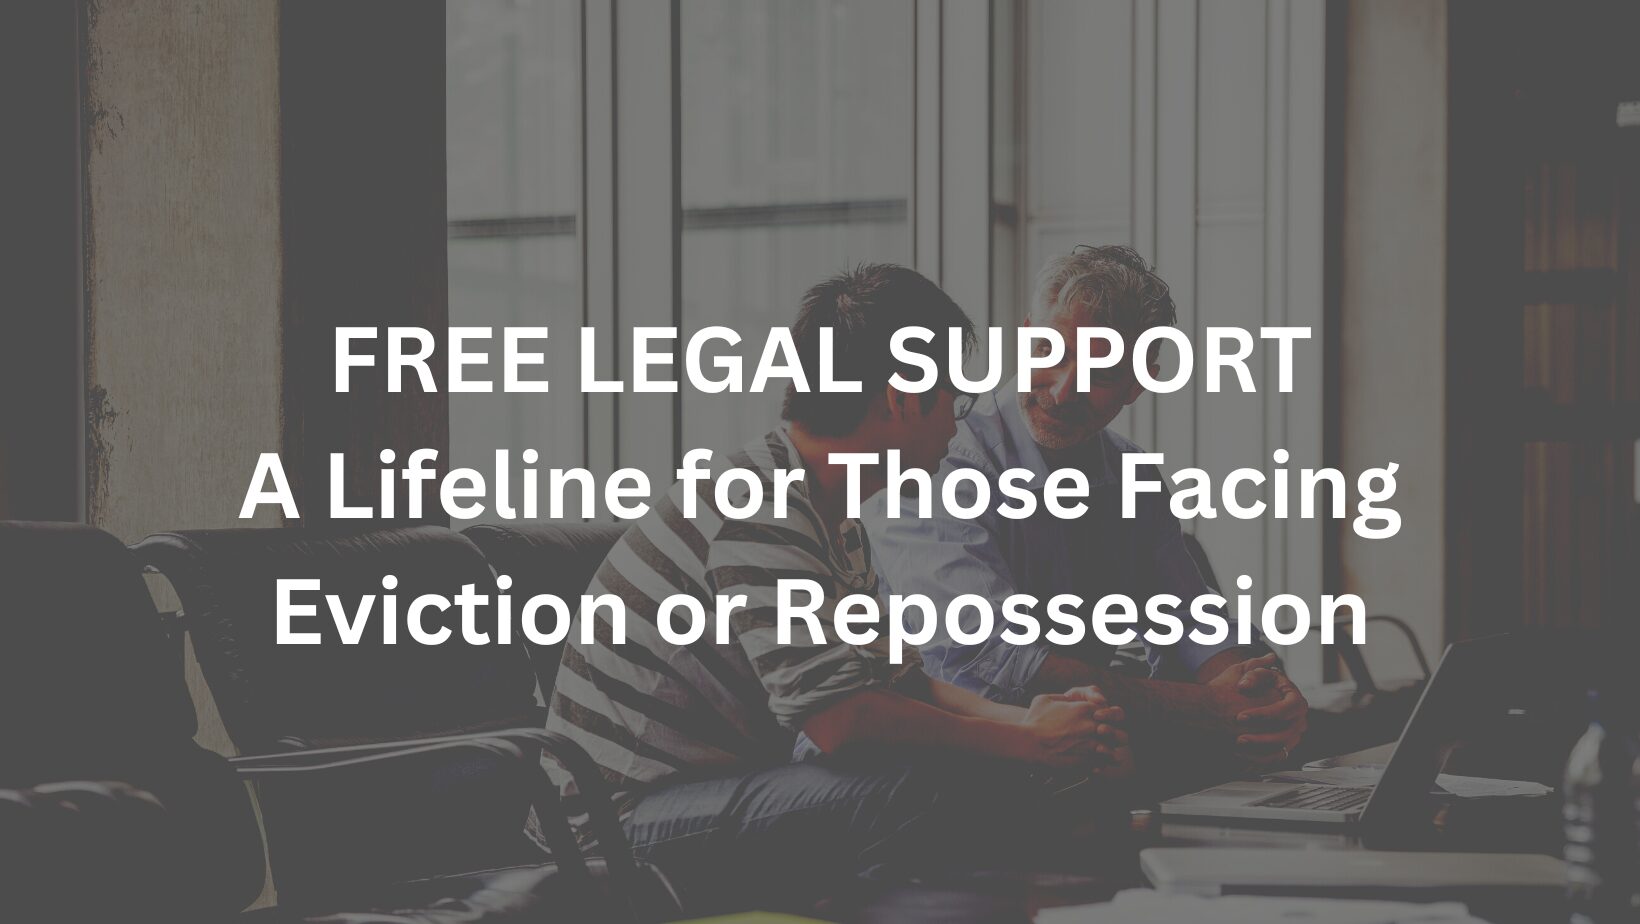 Free Legal Support – A Lifeline for Those Facing Eviction or Repossession